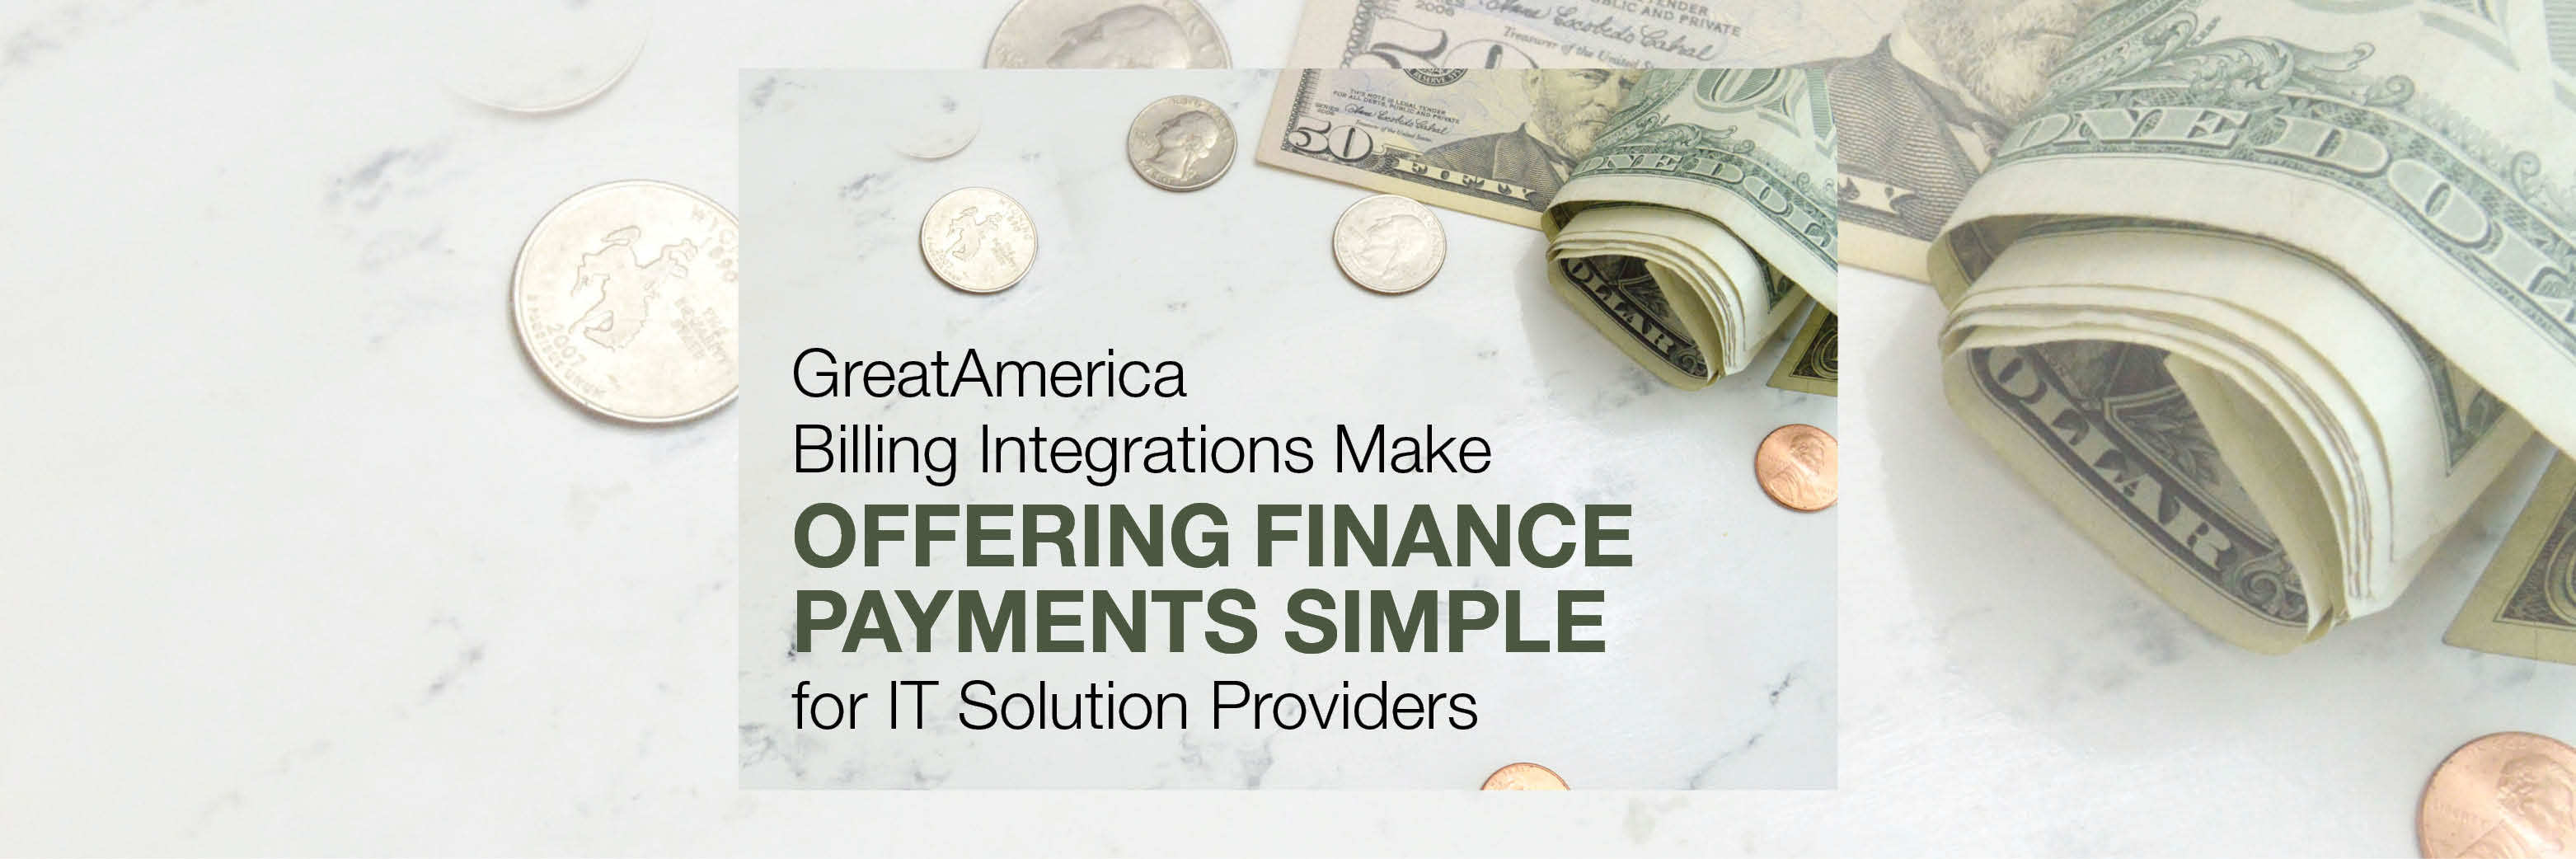 Offer Finance Payments with GreatAmerica Billing Integration